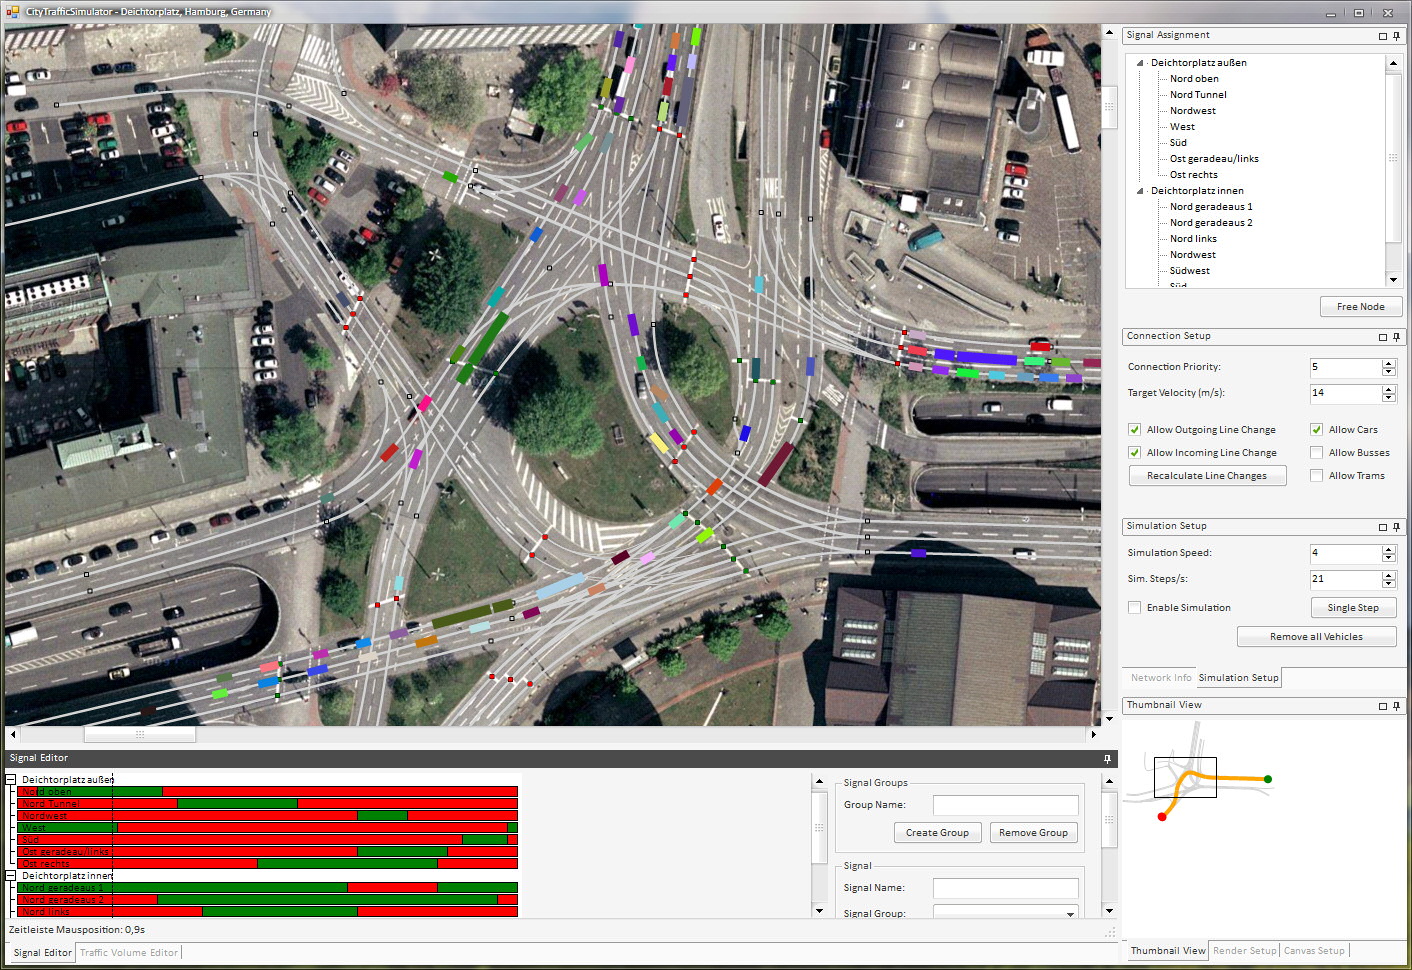 CityTrafficSimulator modeling a large intersection in downtown Hamburg.